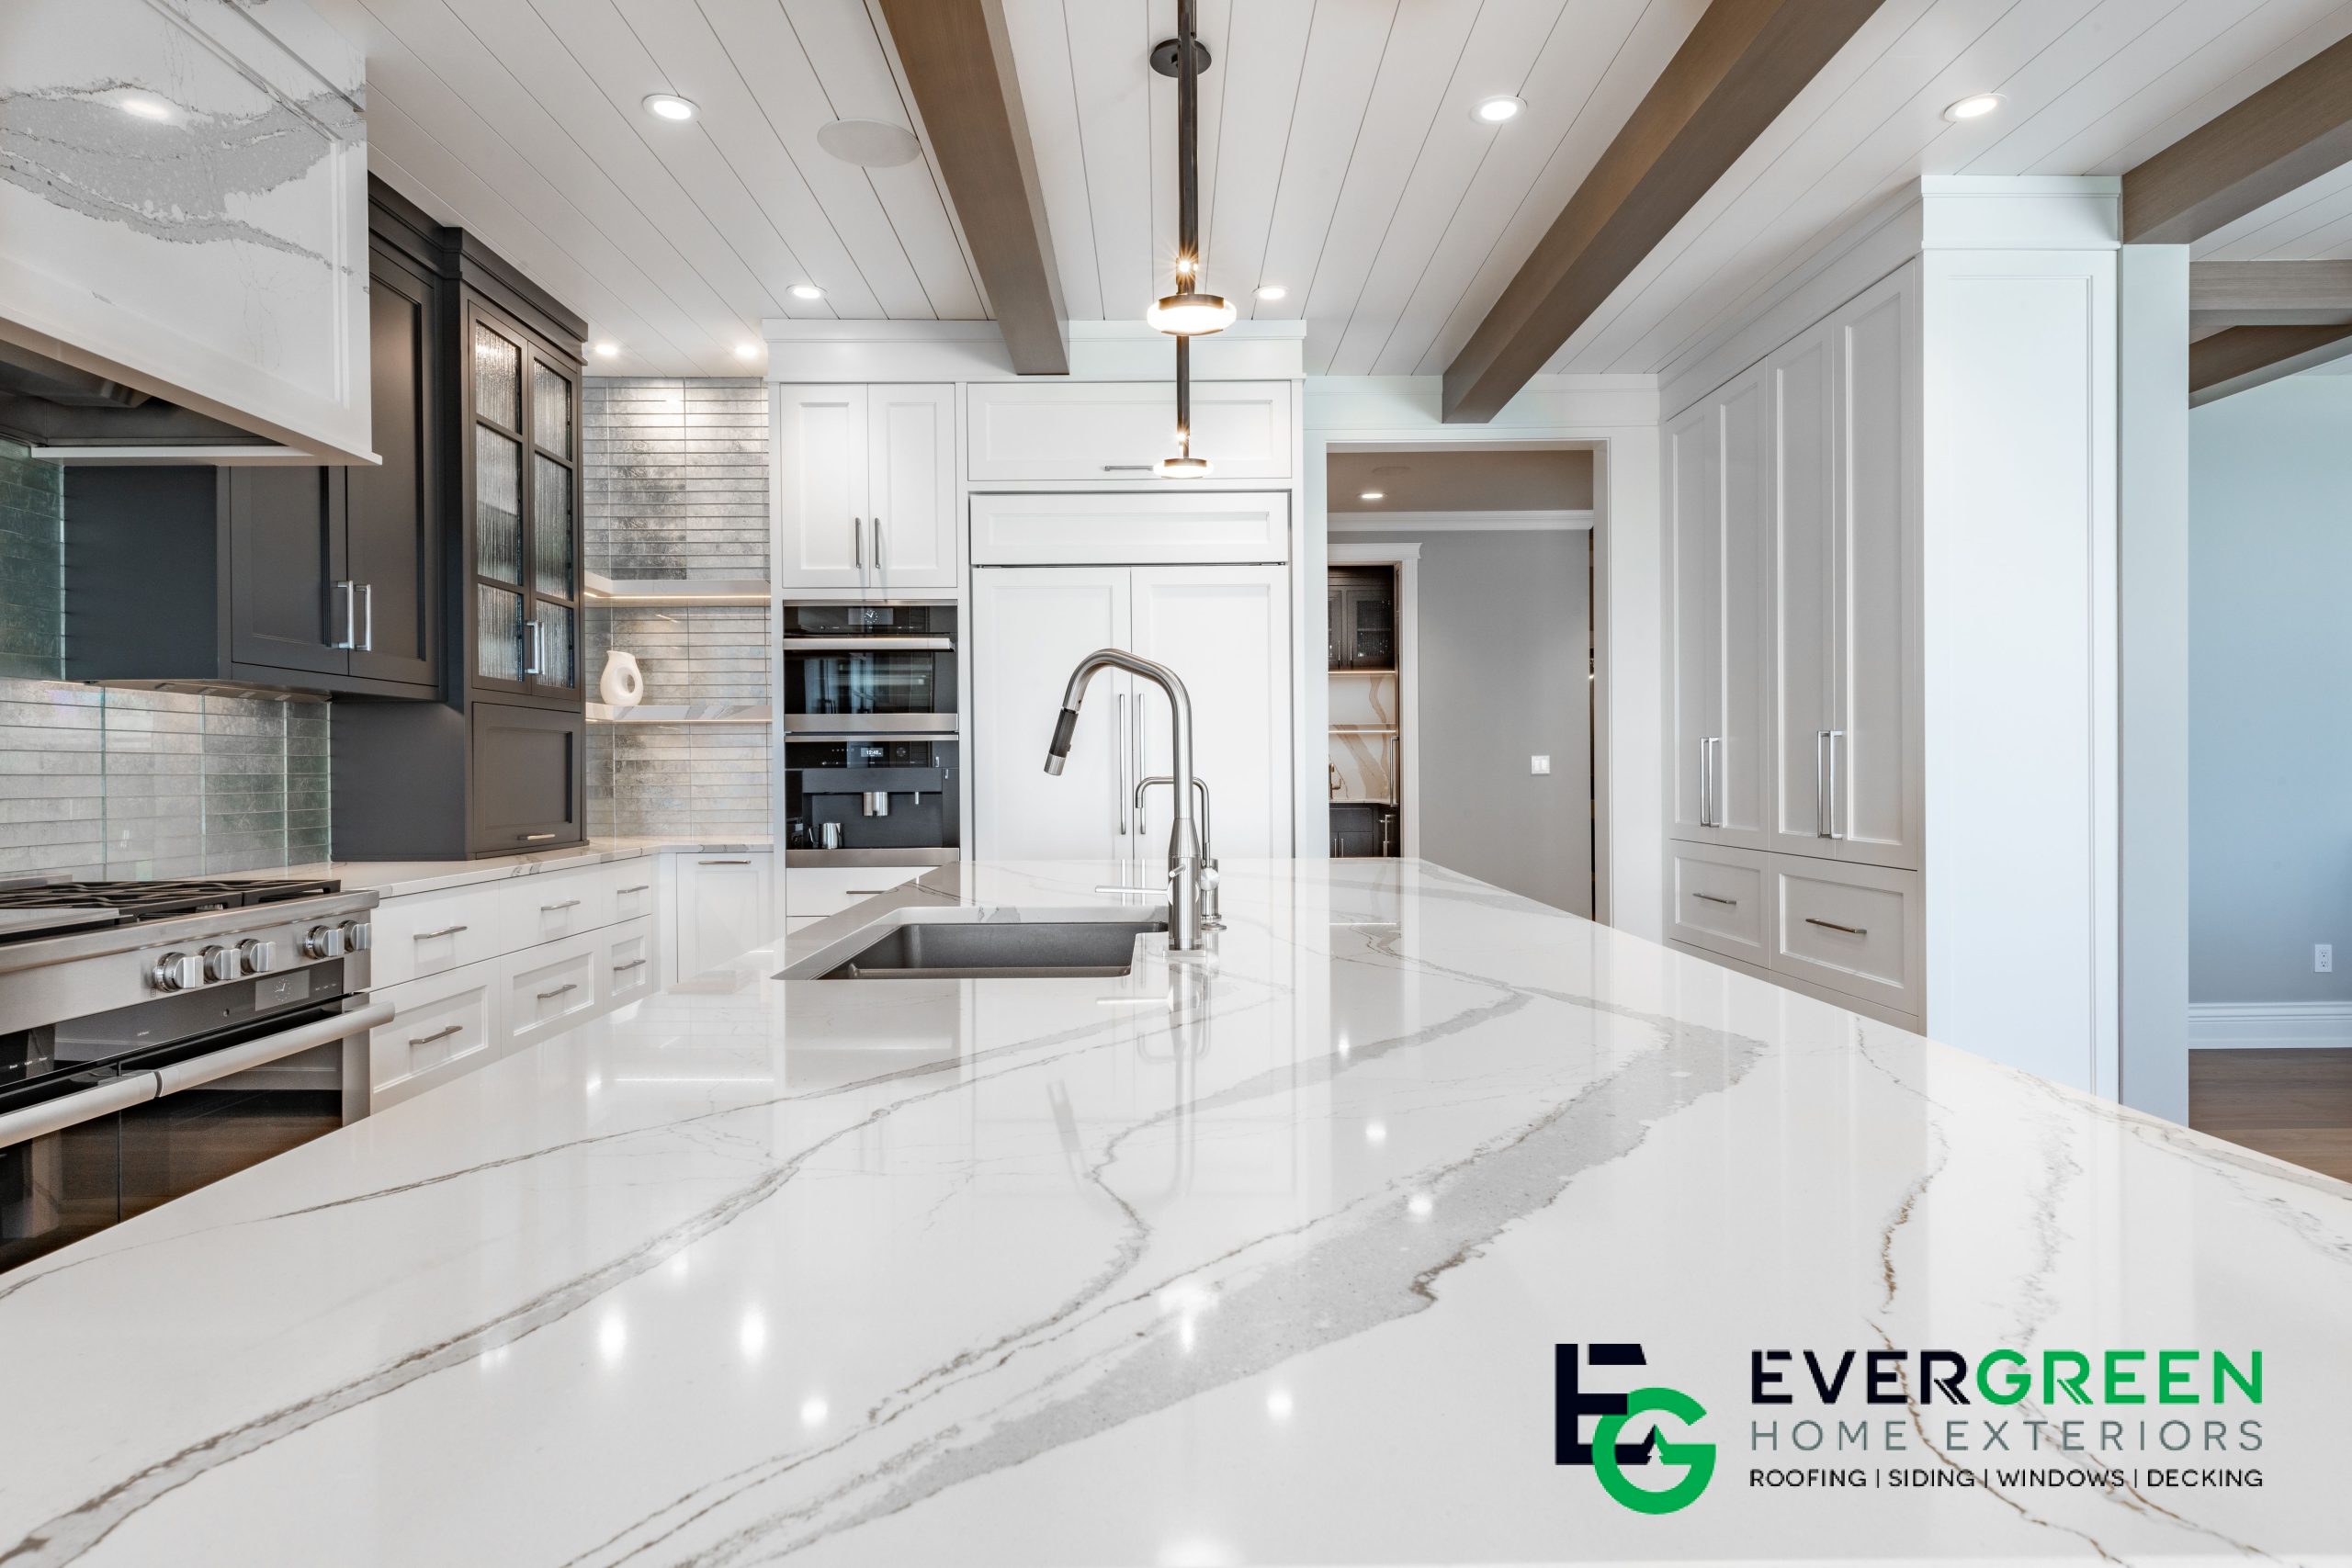 Talk With Us About Your Kitchen Remodel